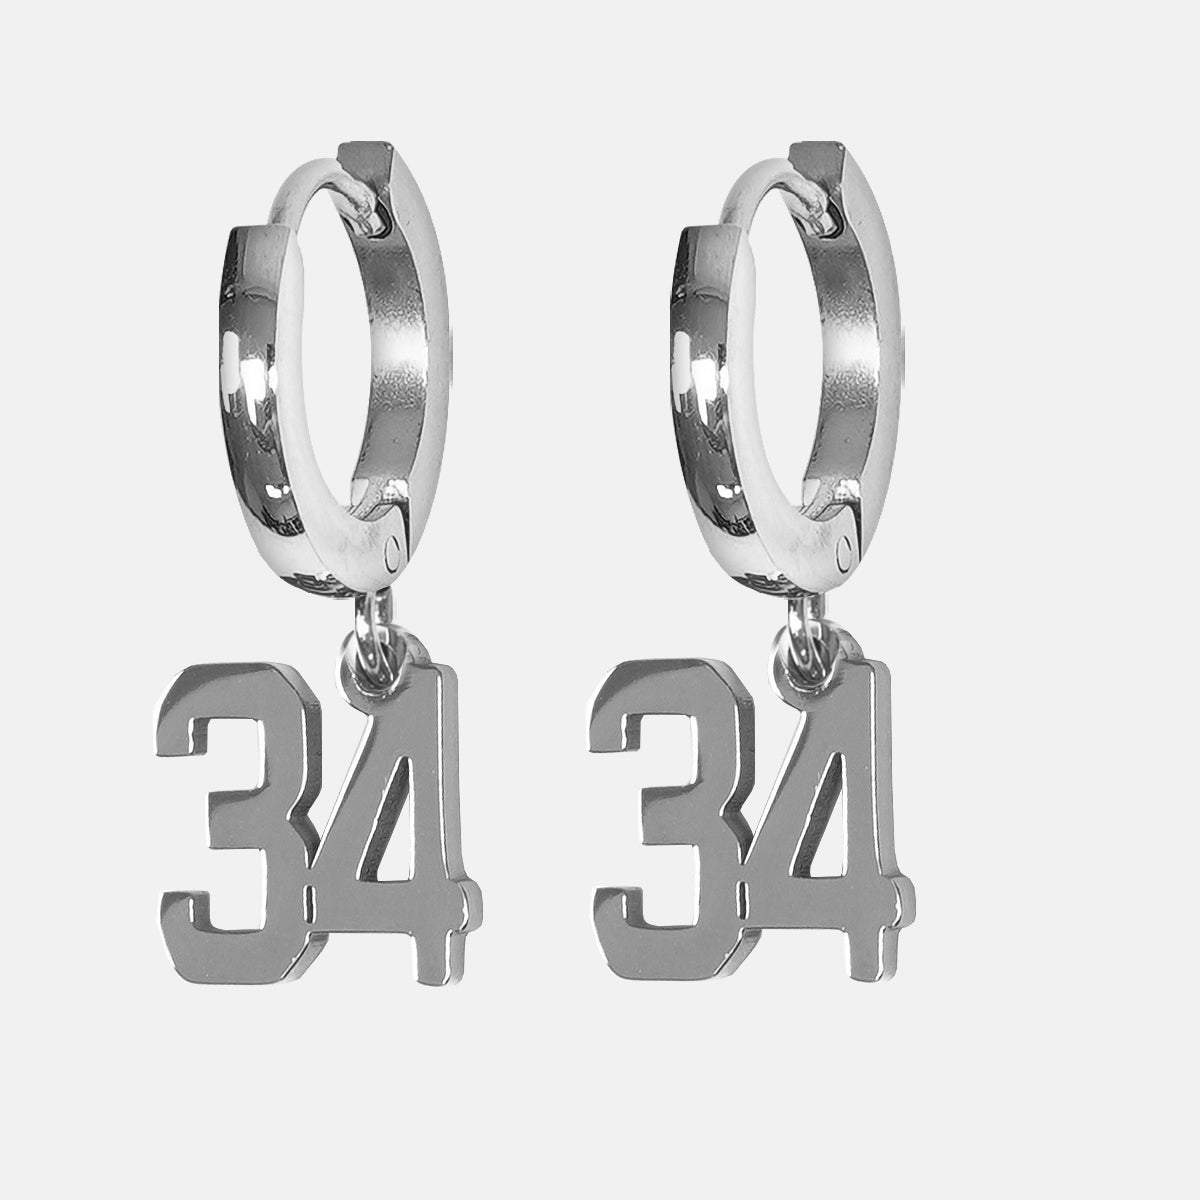 34 Number Earring - Stainless Steel